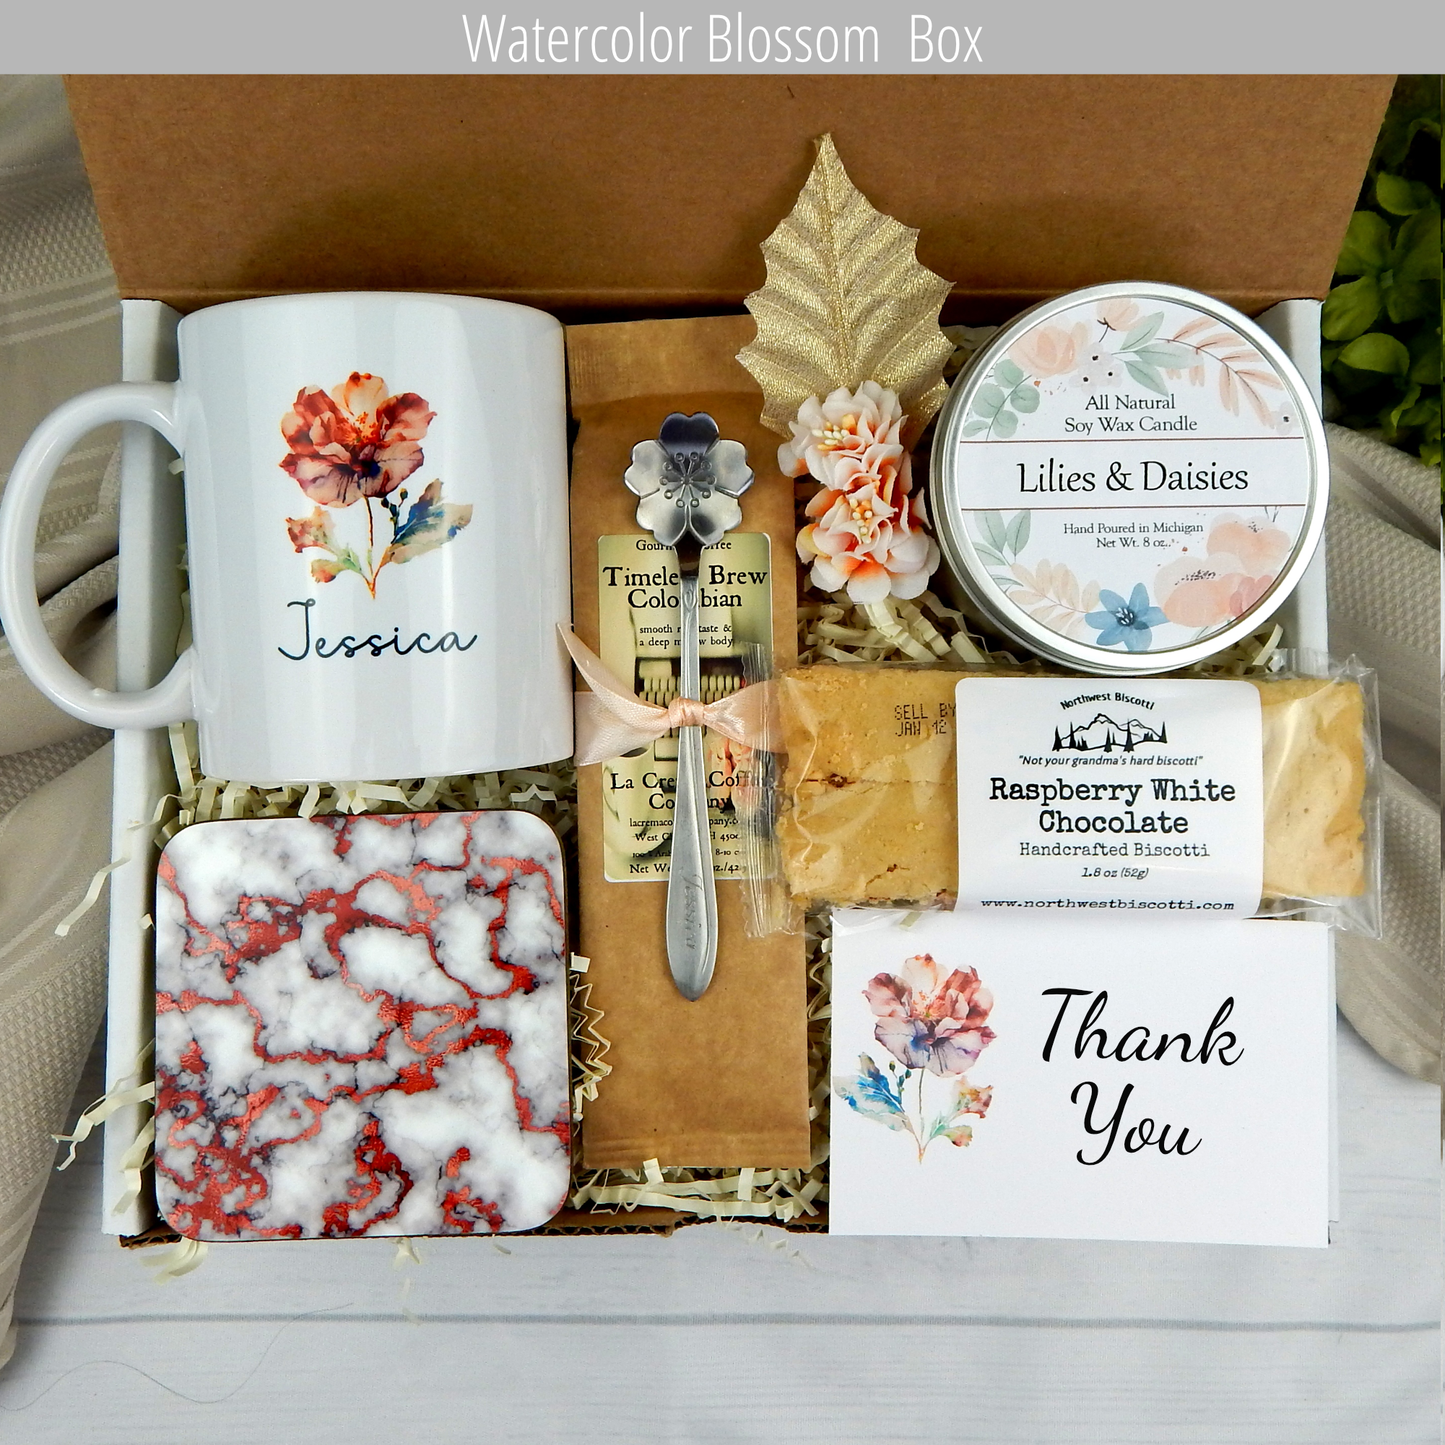 Versatile thank you gift: Custom name mug, candlelight, engraved spoon, biscotti, and coffee for any occasion.